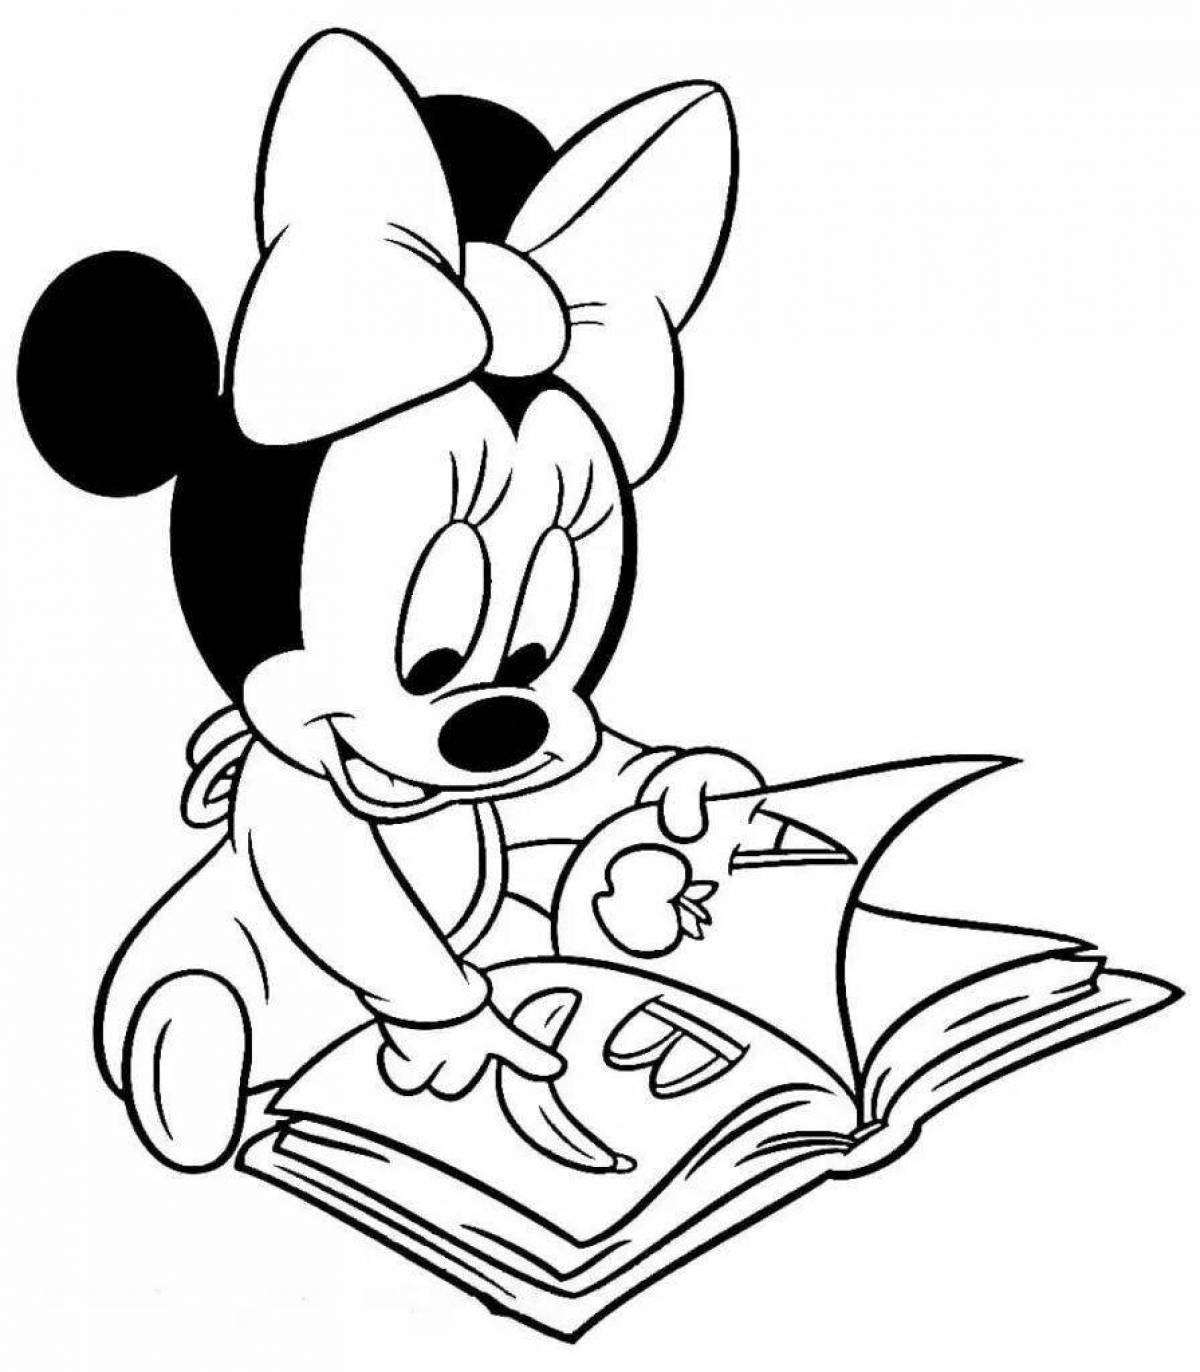 Archive of creative coloring pages for kids